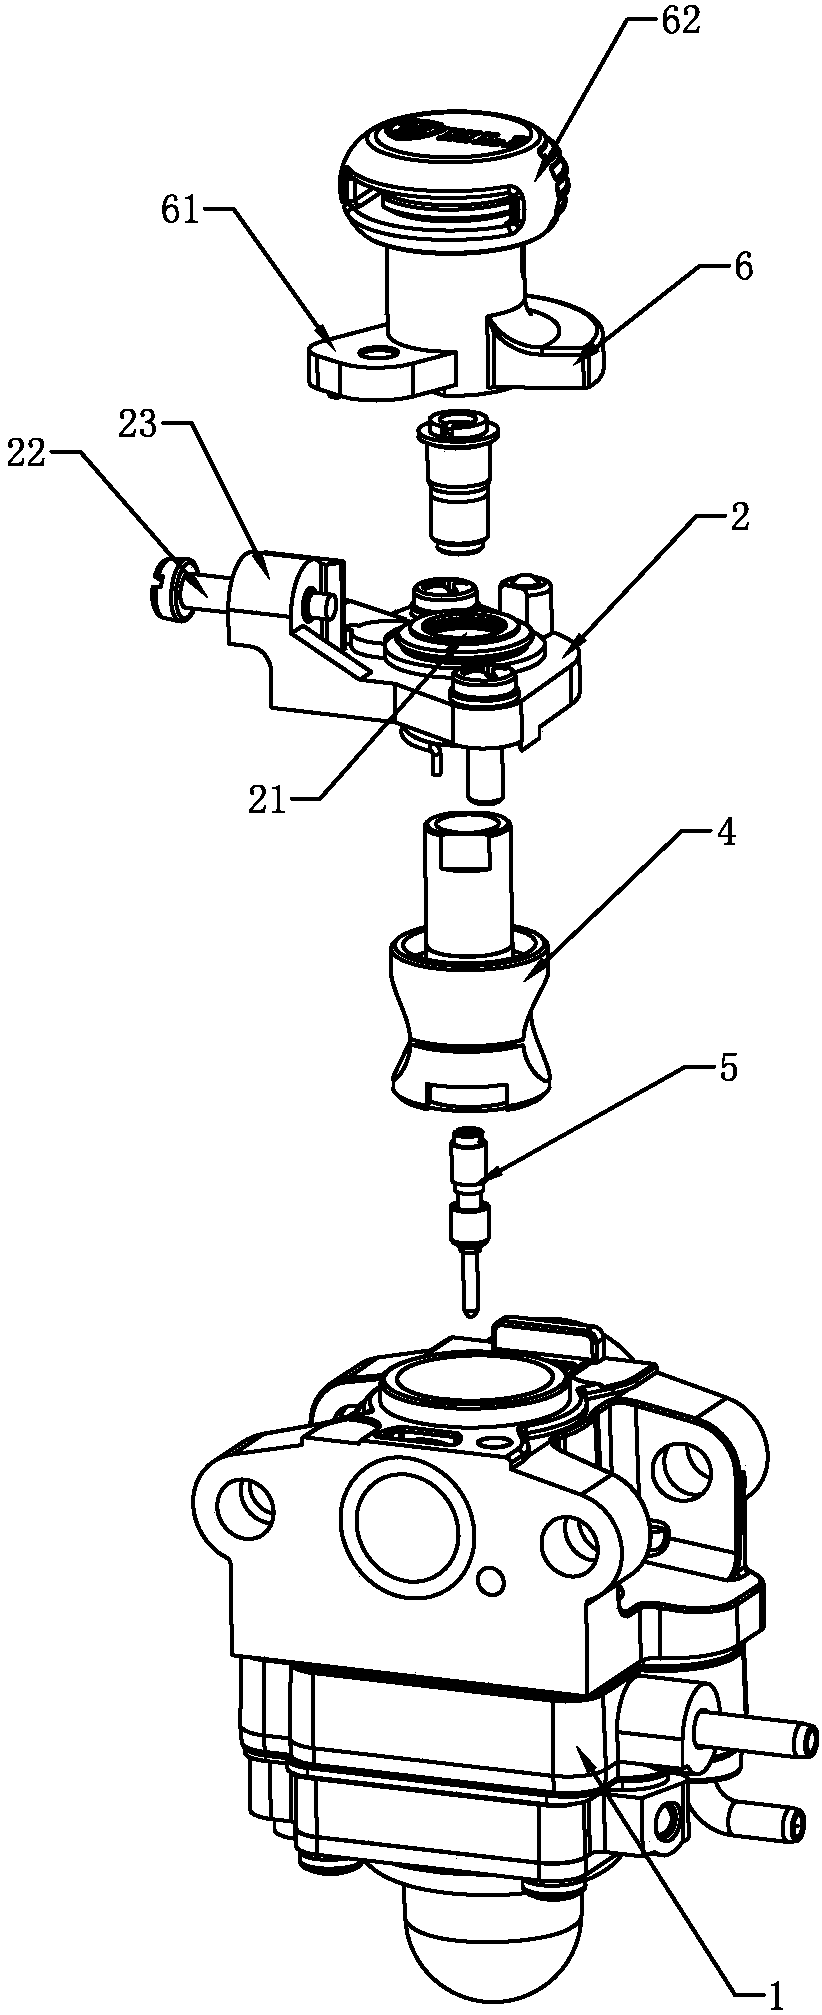 Carburetor provided with rotary valve and capable of being started rapidly